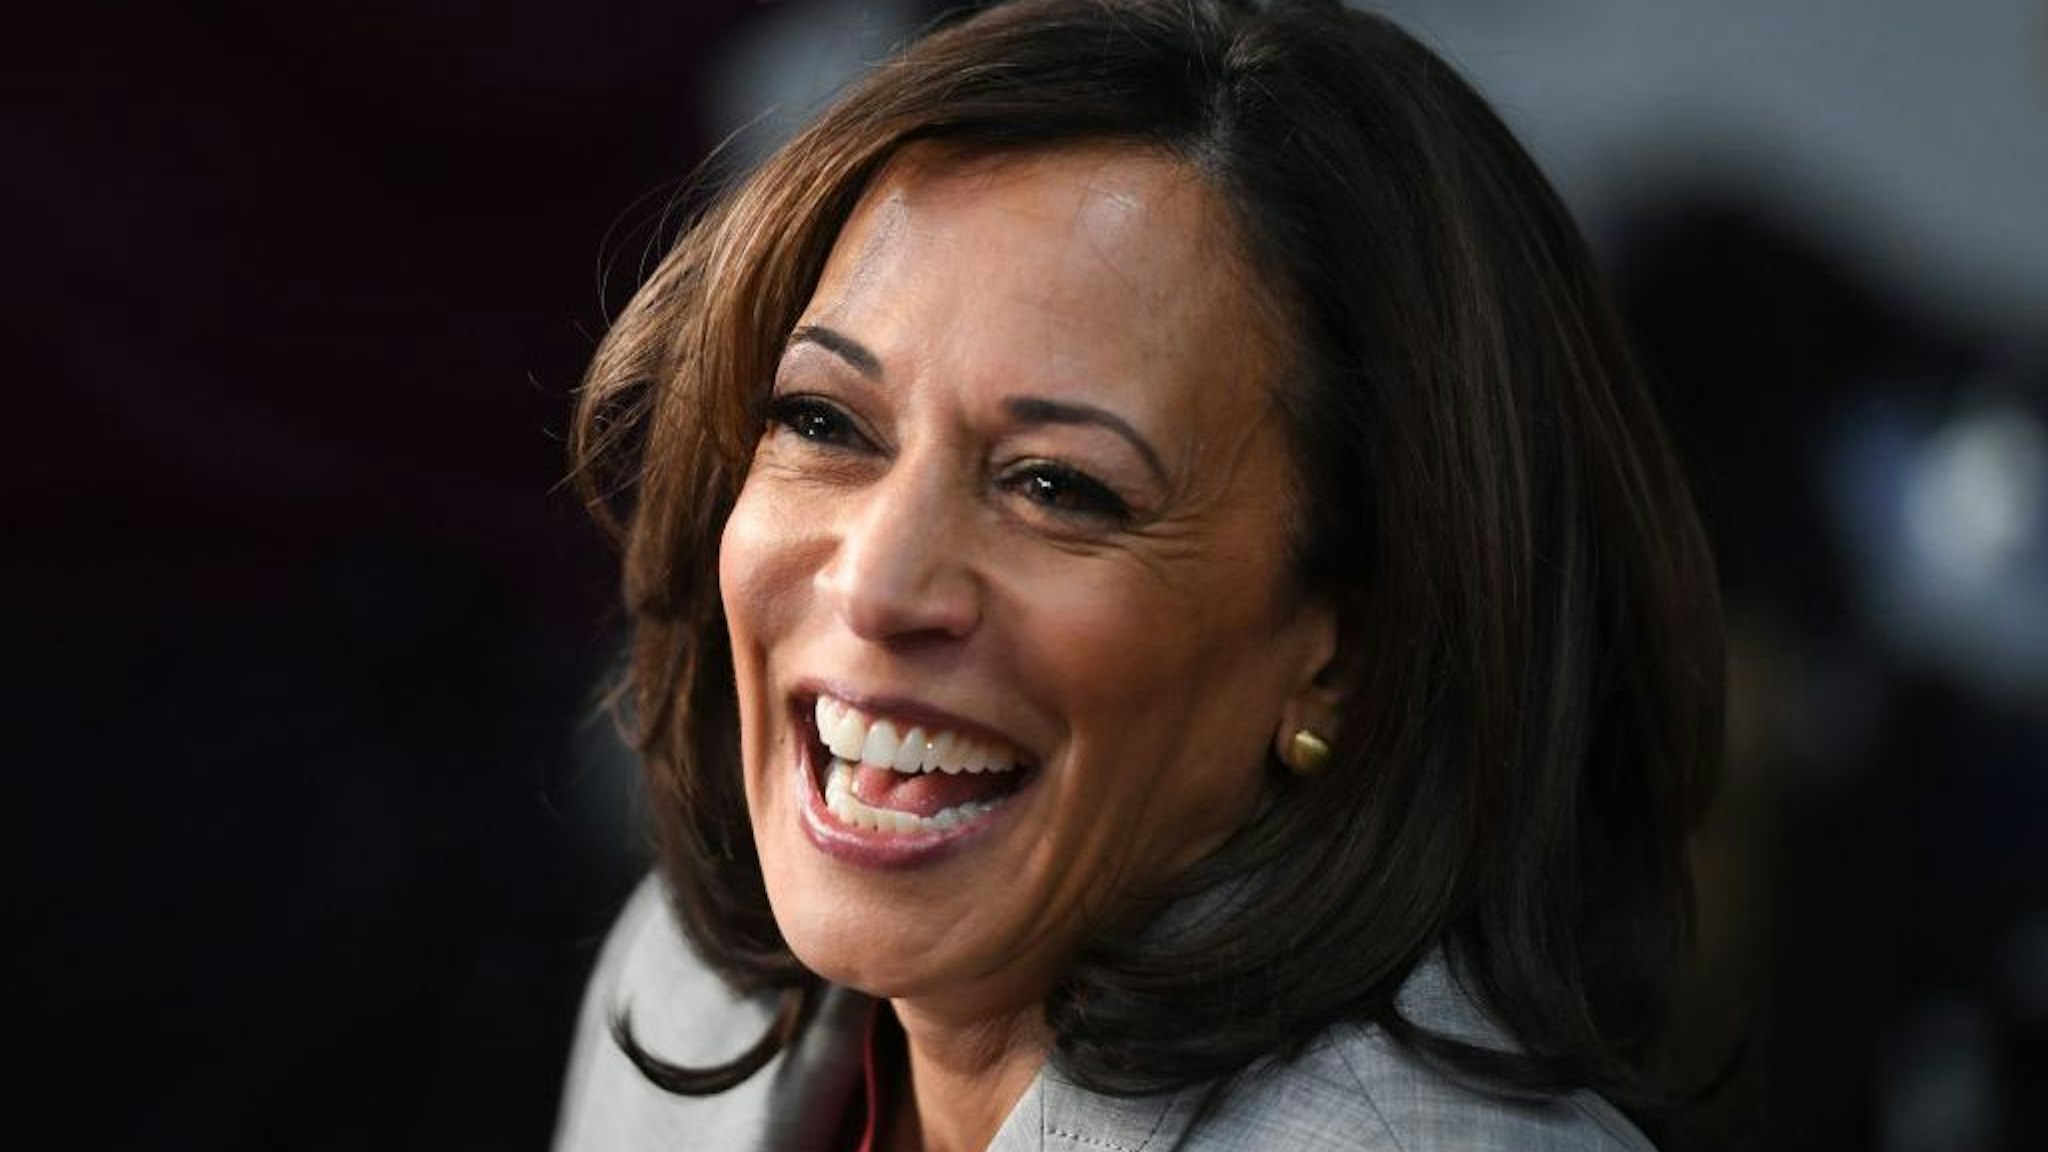 Democratic presidential hopeful California Senator Kamala Harris speaks to the press in the Spin Room after participating in the fifth Democratic primary debate of the 2020 presidential campaign season co-hosted by MSNBC and The Washington Post at Tyler Perry Studios in Atlanta, Georgia on November 20, 2019. (Photo by SAUL LOEB / AFP)